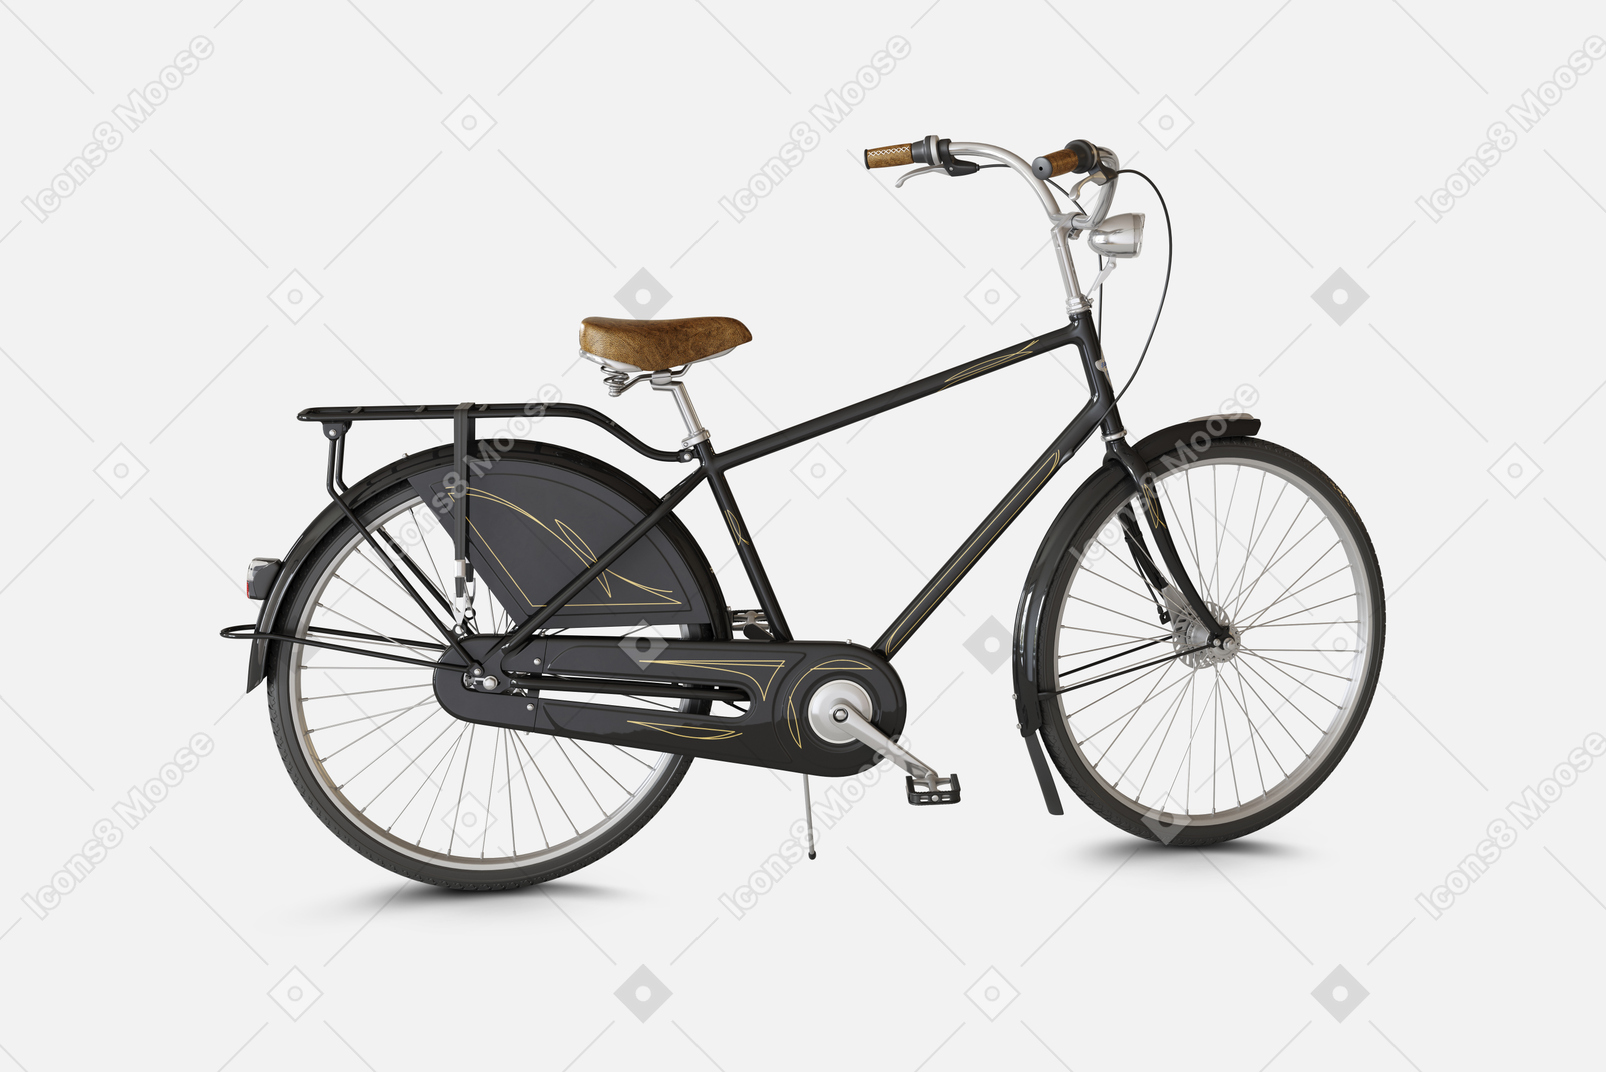 Black city bike with front and rear brakes and a special frame